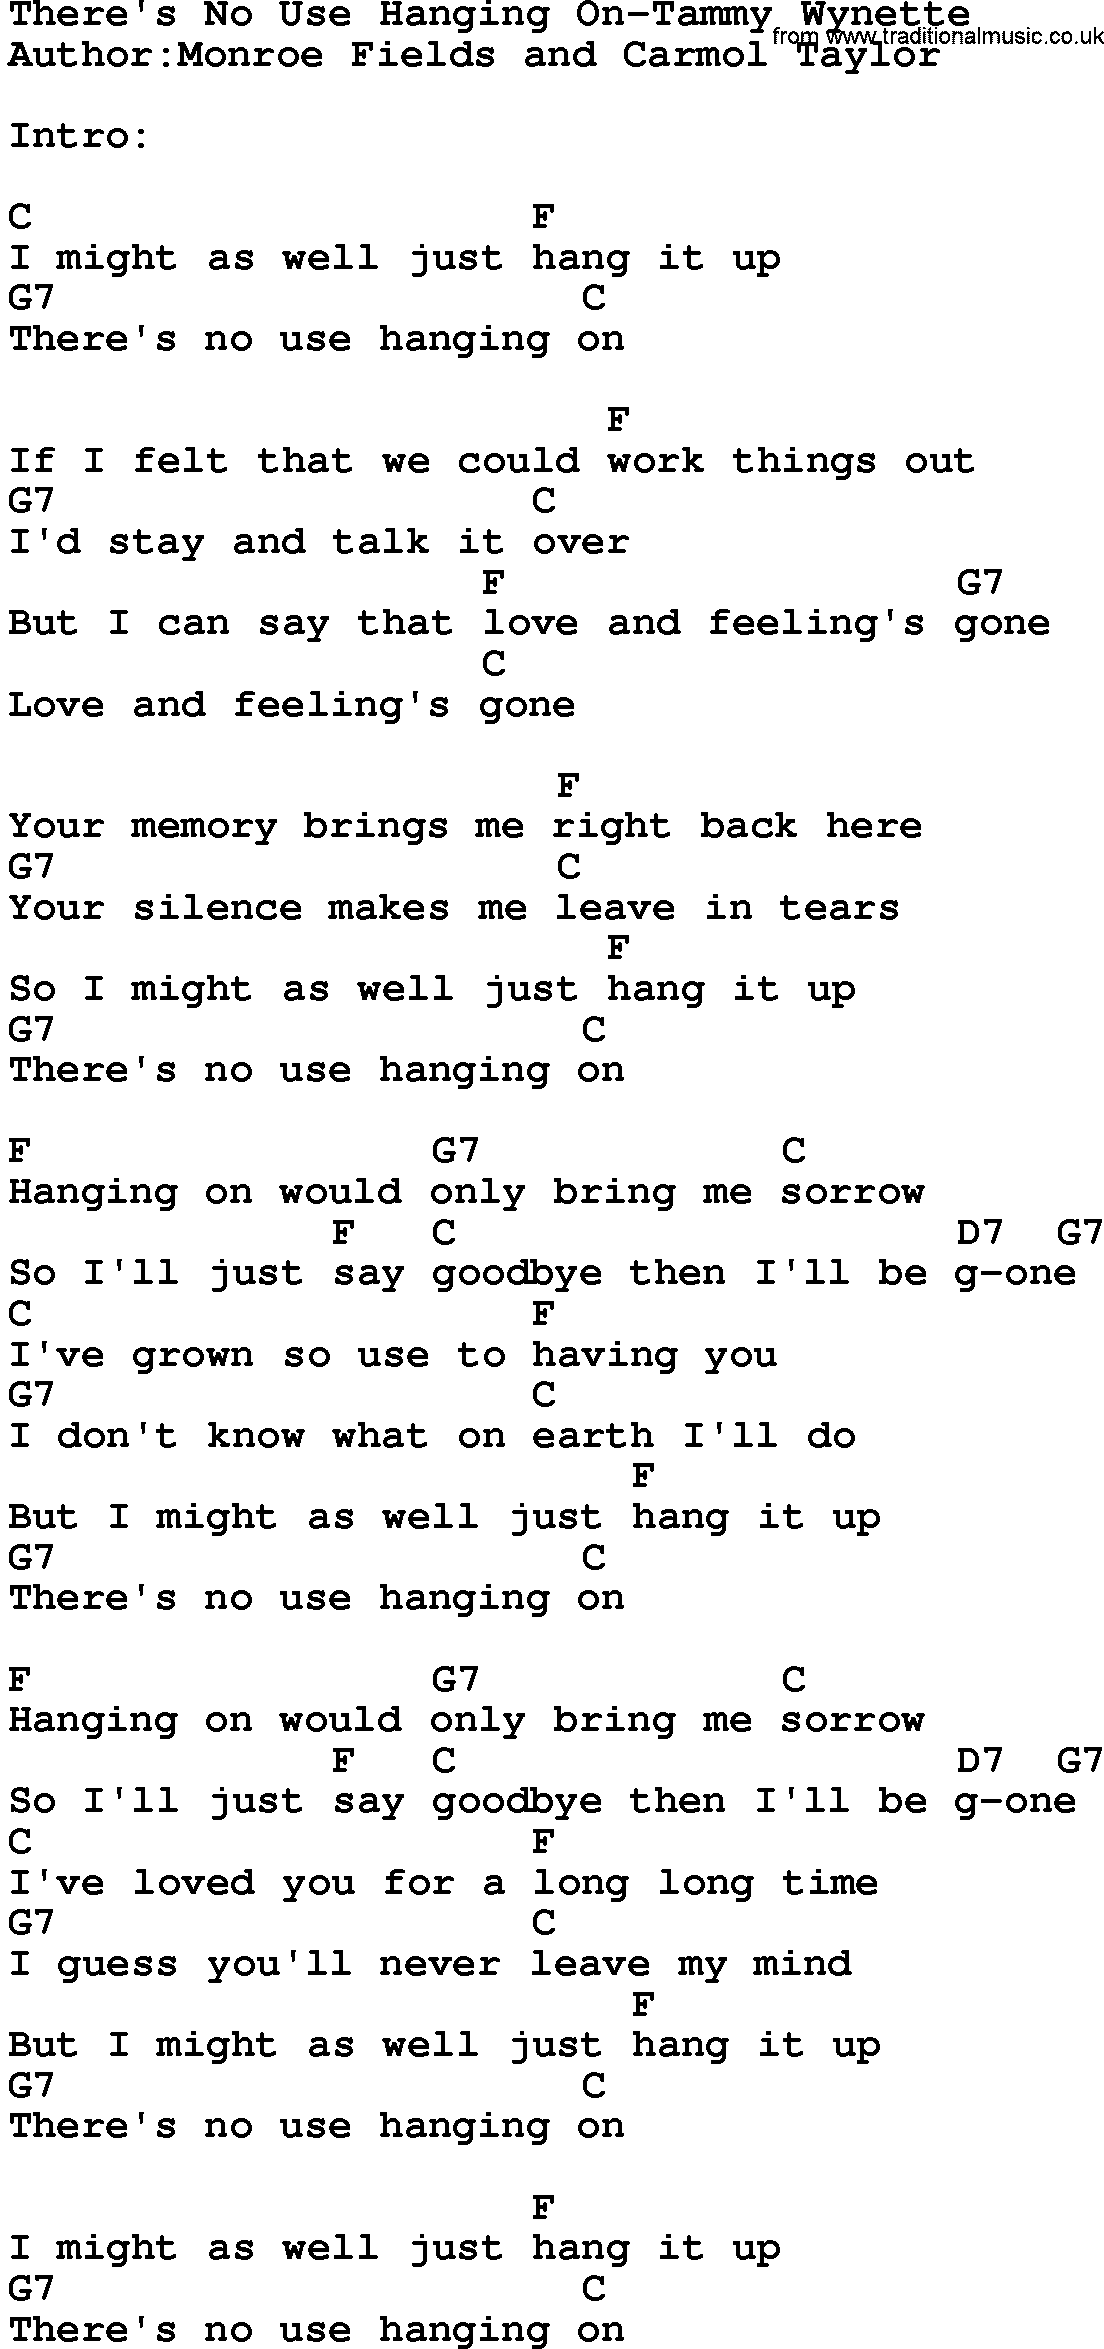 Country music song: There's No Use Hanging On-Tammy Wynette lyrics and chords